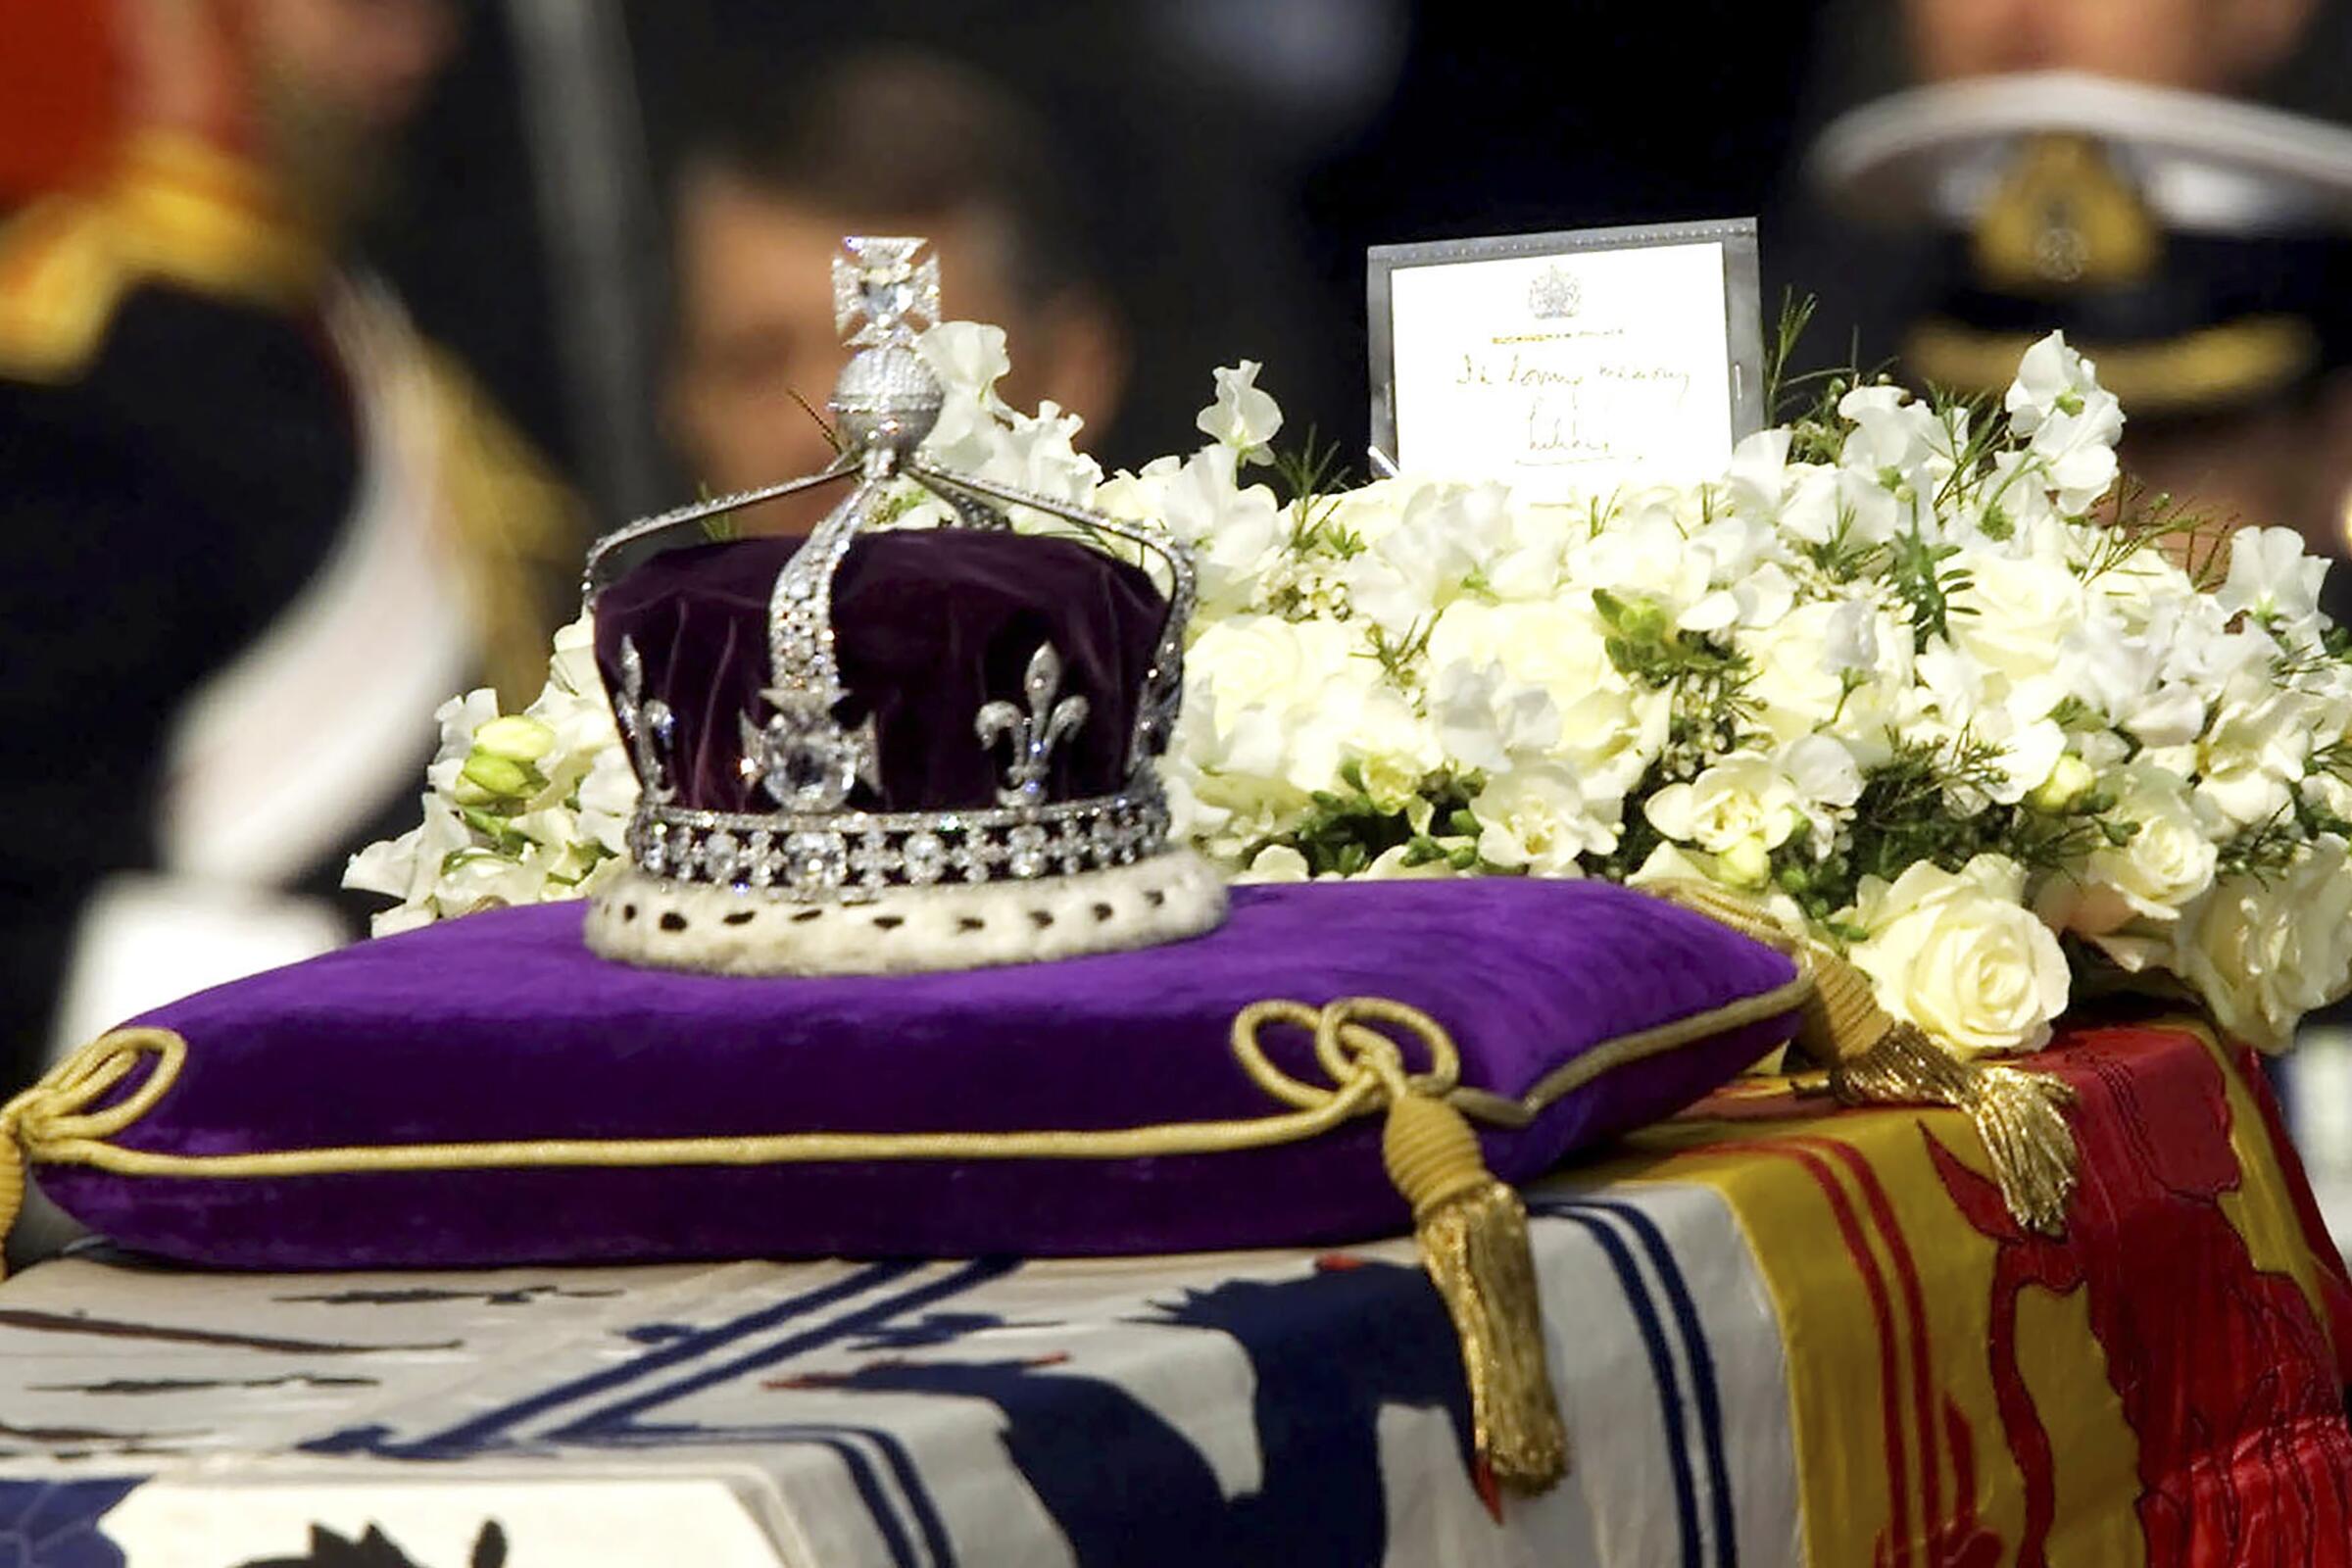 Image shows one of the British royalty's crowns, which holds the Koh-i-noor diamond, set in a Maltese cross